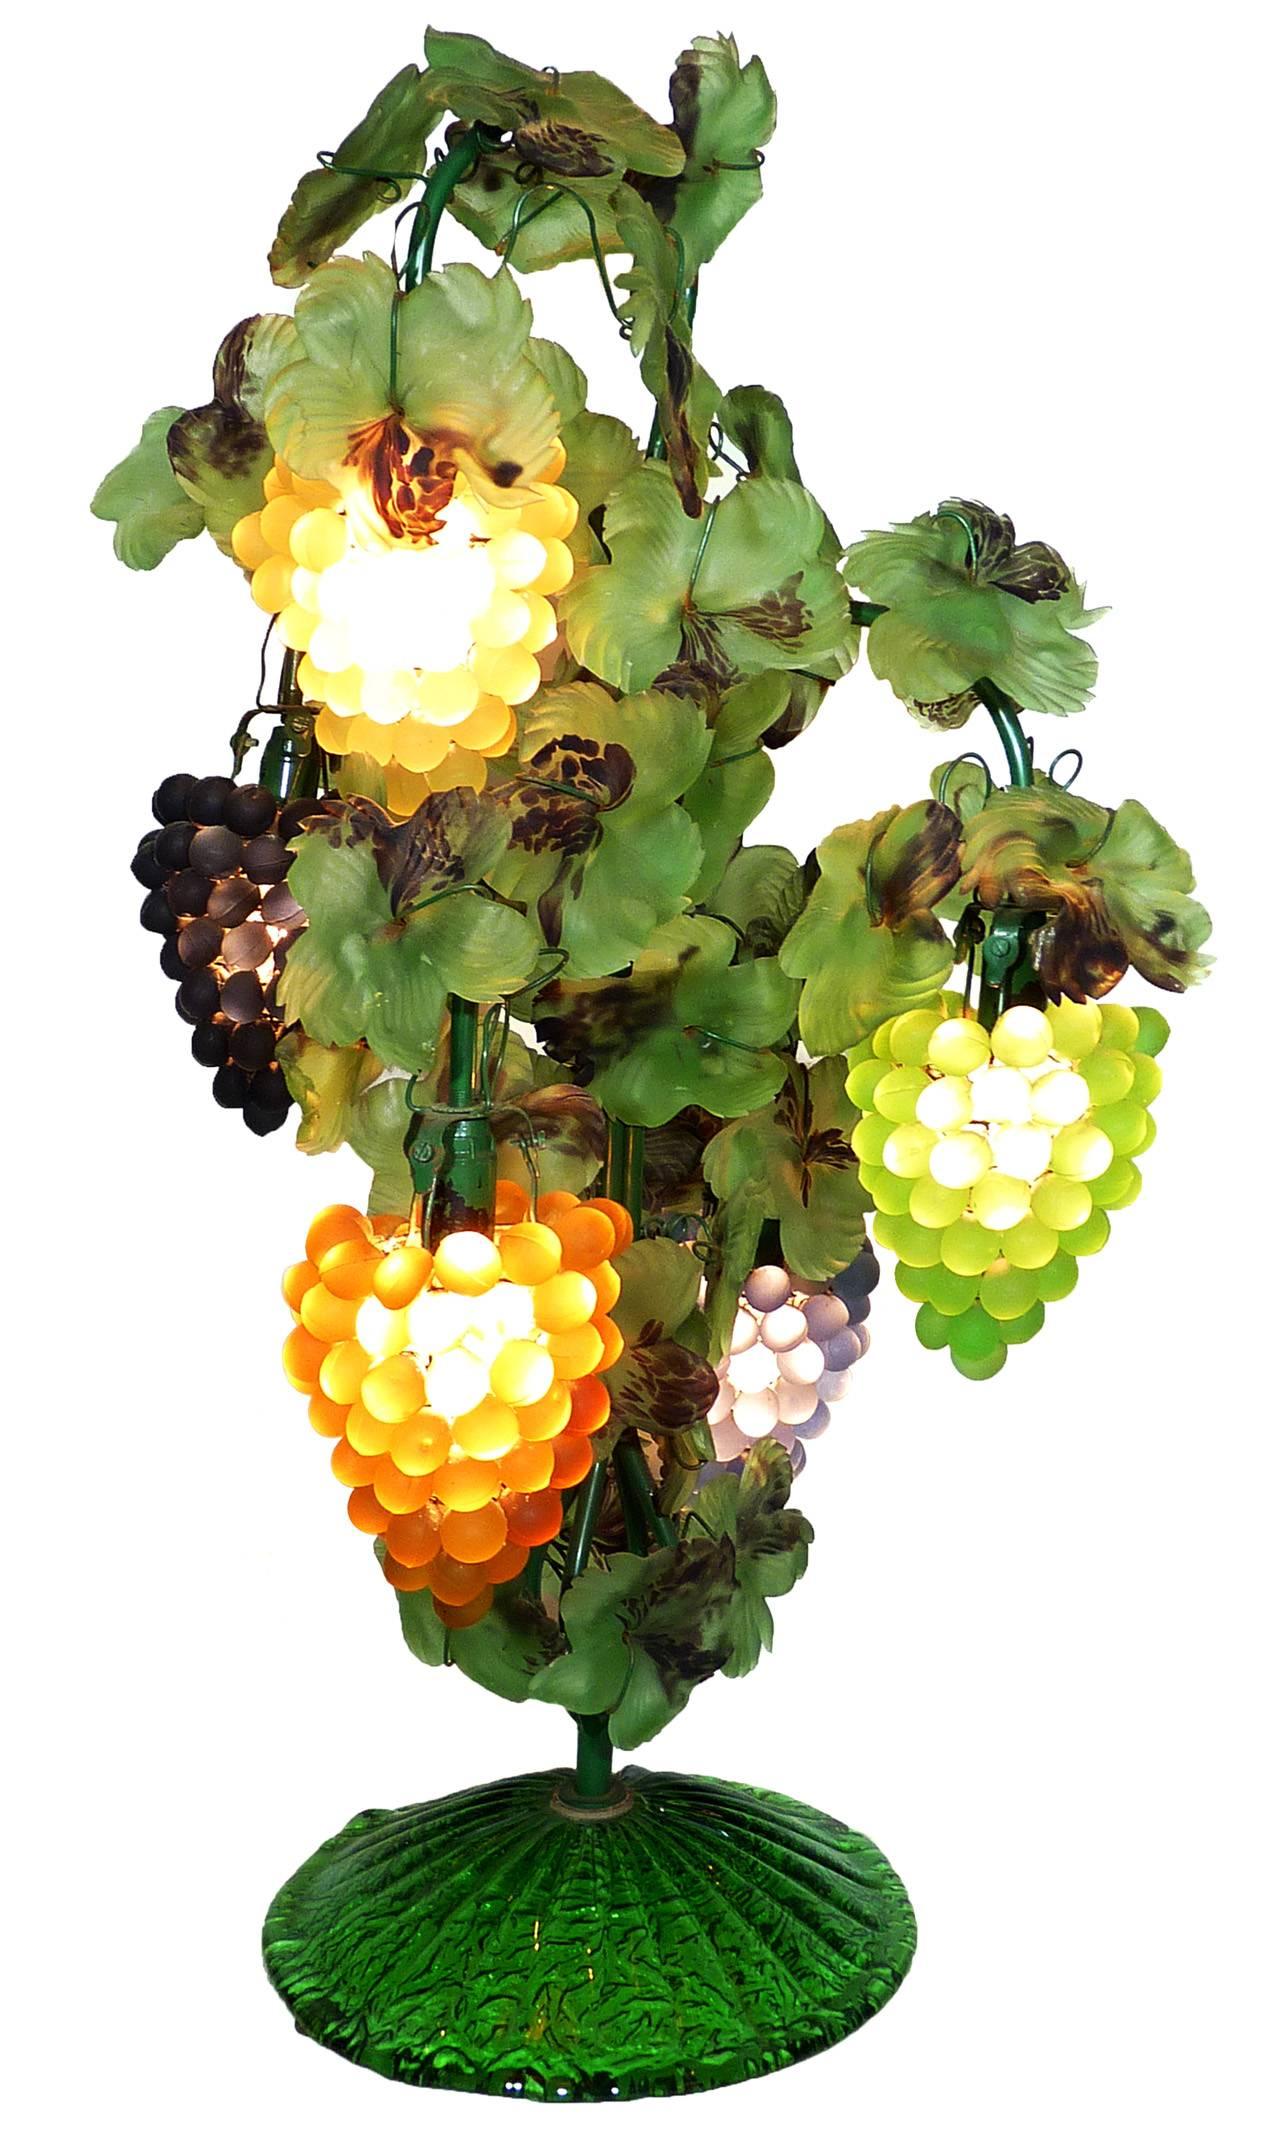 This a fabulous heavy five-light Venetian glass grape bunch and leaf floor or table lamp mimics the shape of a vine with clustered grapes as shades, hand blown applied leaves in the style of Art Nouveau. 
Blown green glass base with five different